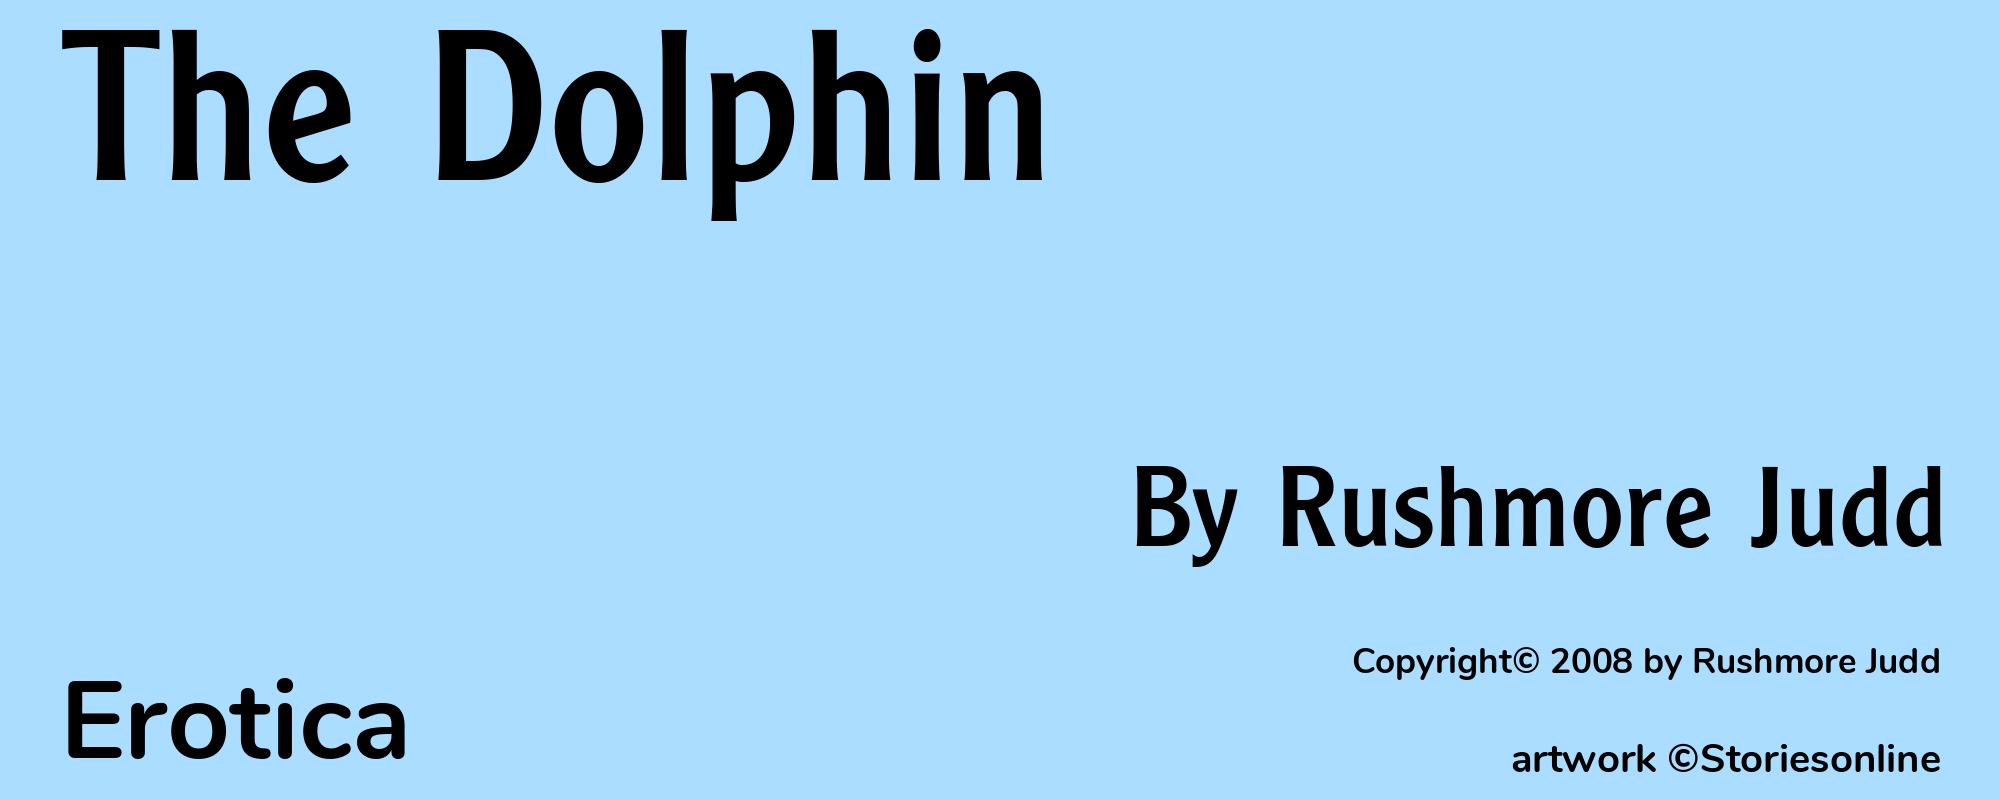 The Dolphin - Cover